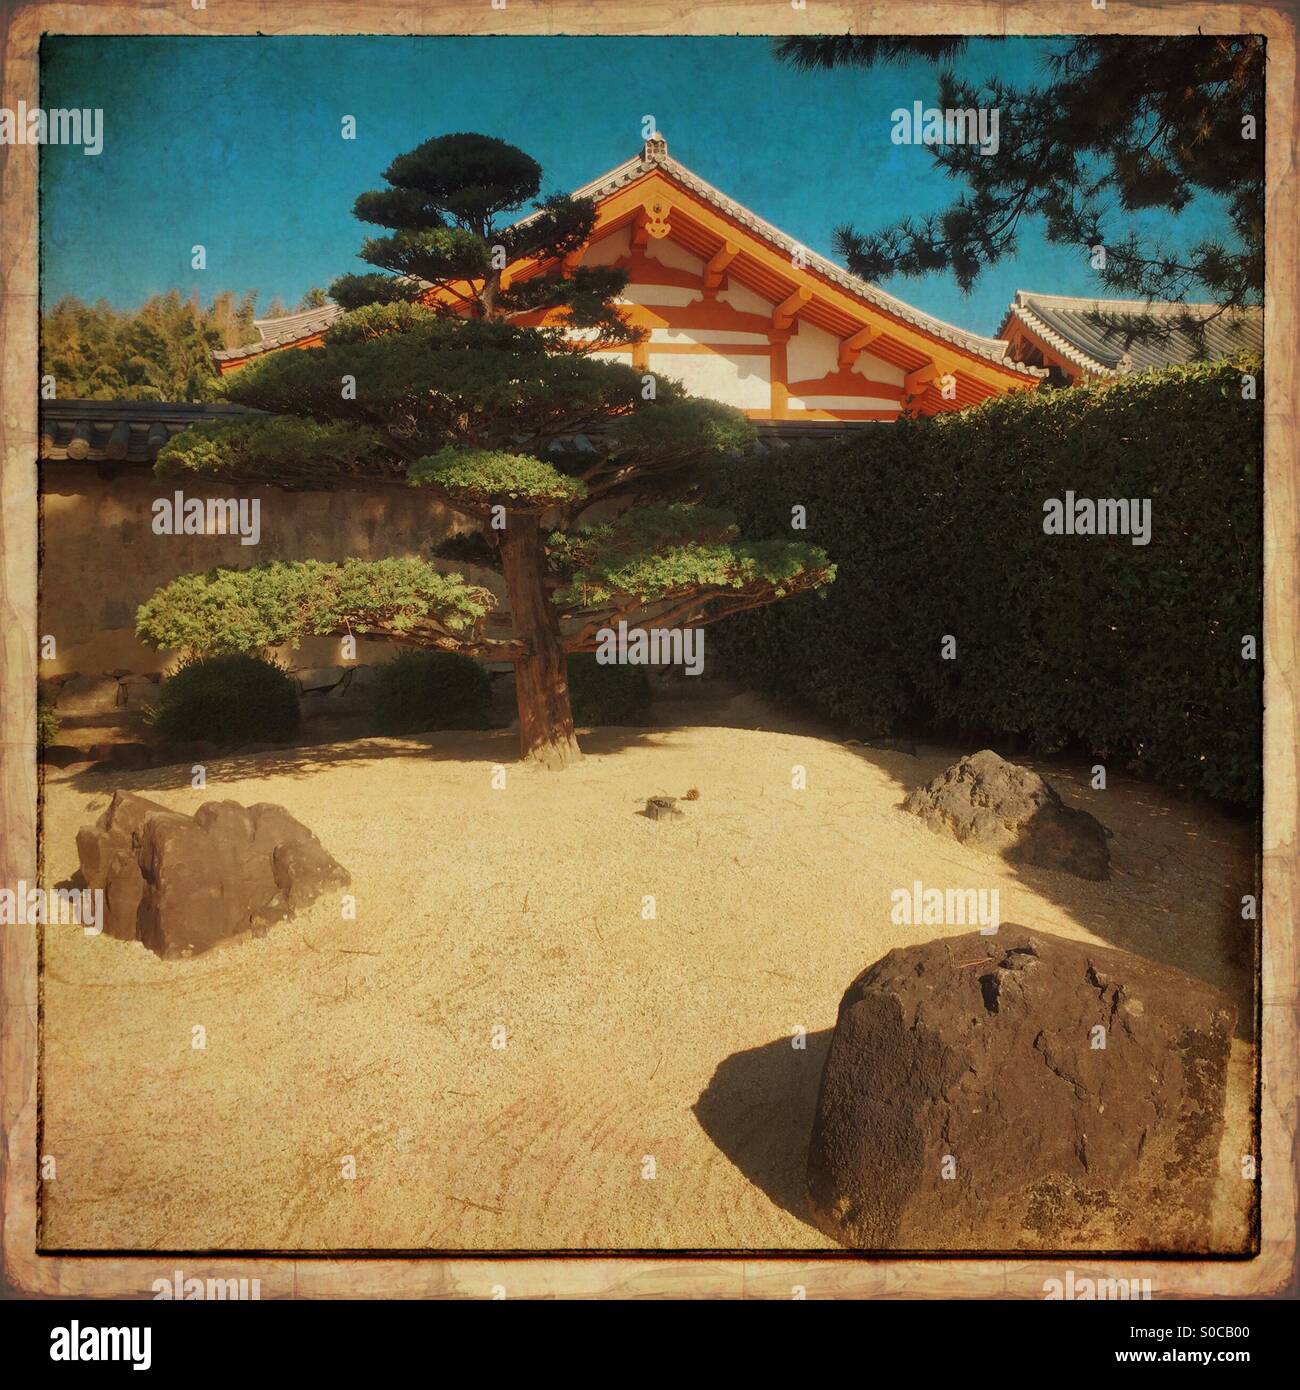 Karesansui, a dry landscape Japanese garden  composed entirely of rocks and sand, at Horyu-ji temple in Ikaruga, Nara Prefecture, Japan. World Heritage Site. Vintage paper frame. Stock Photo